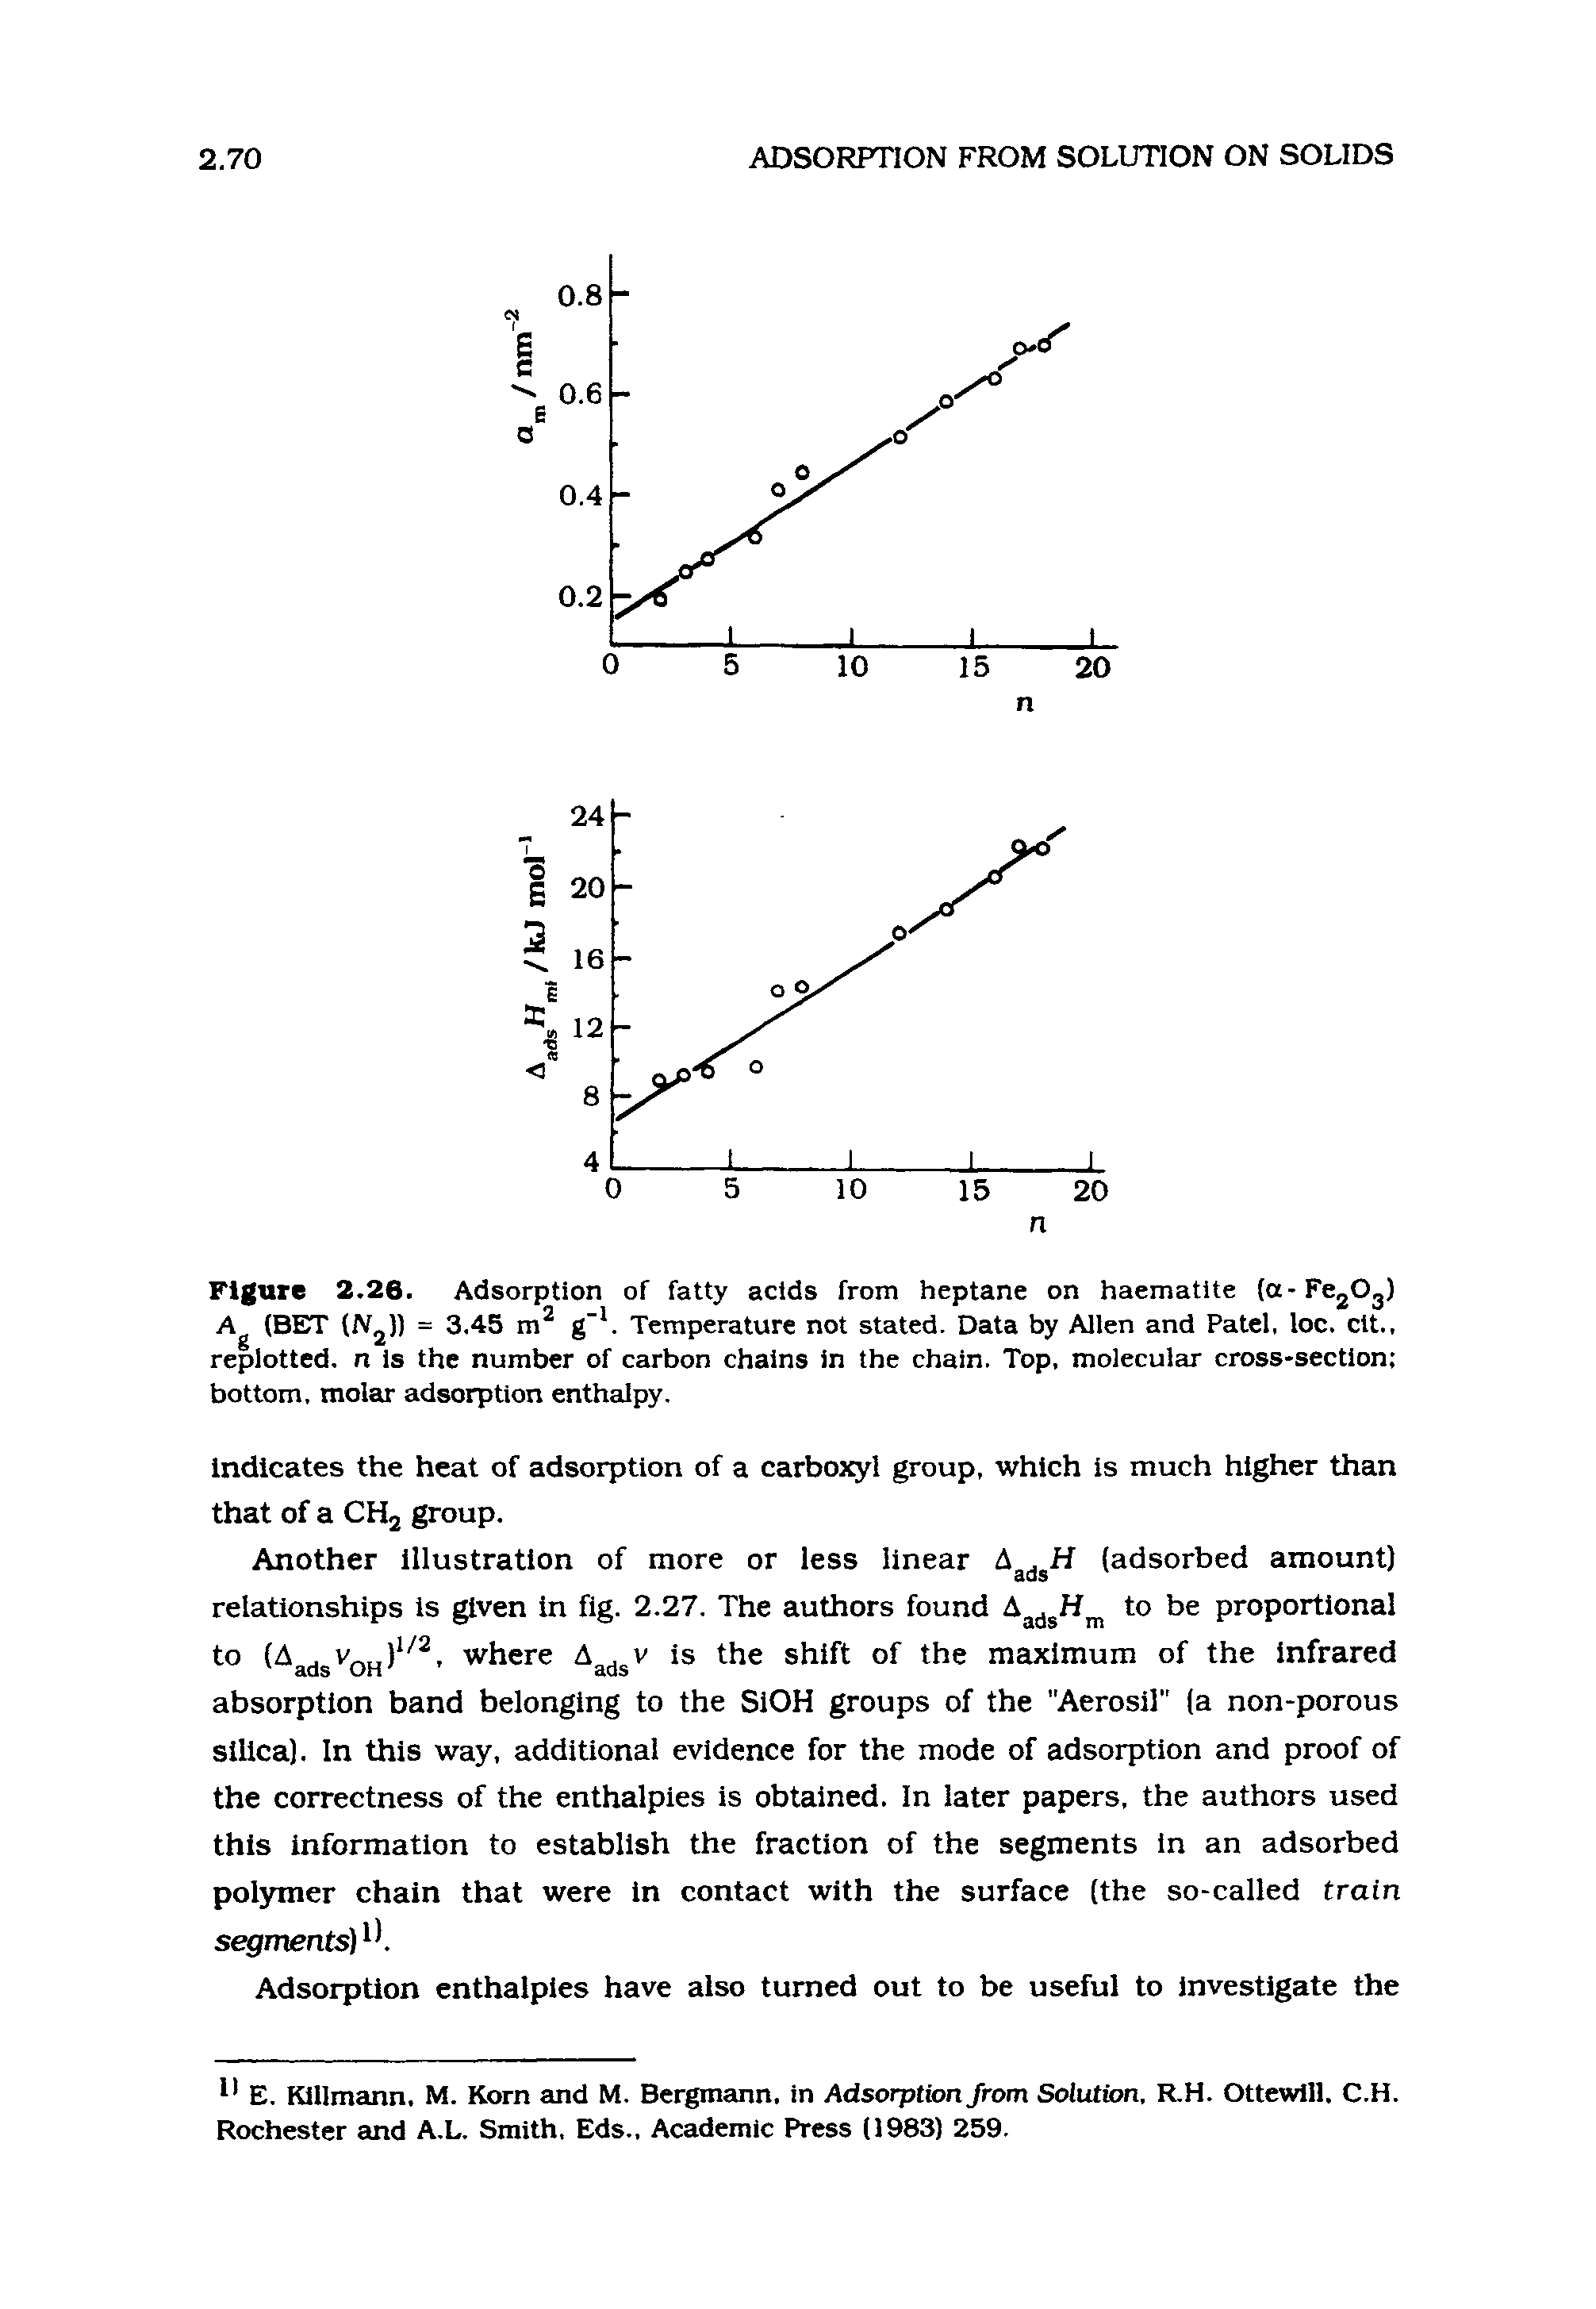 Figure 2.26. Adsorption of fatty acids from heptane on haematite (a-Fe20g) Ag (BET (Njl) = 3.45 g". Temperature not stated. Data by Allen and Patel, loc. clt.,...